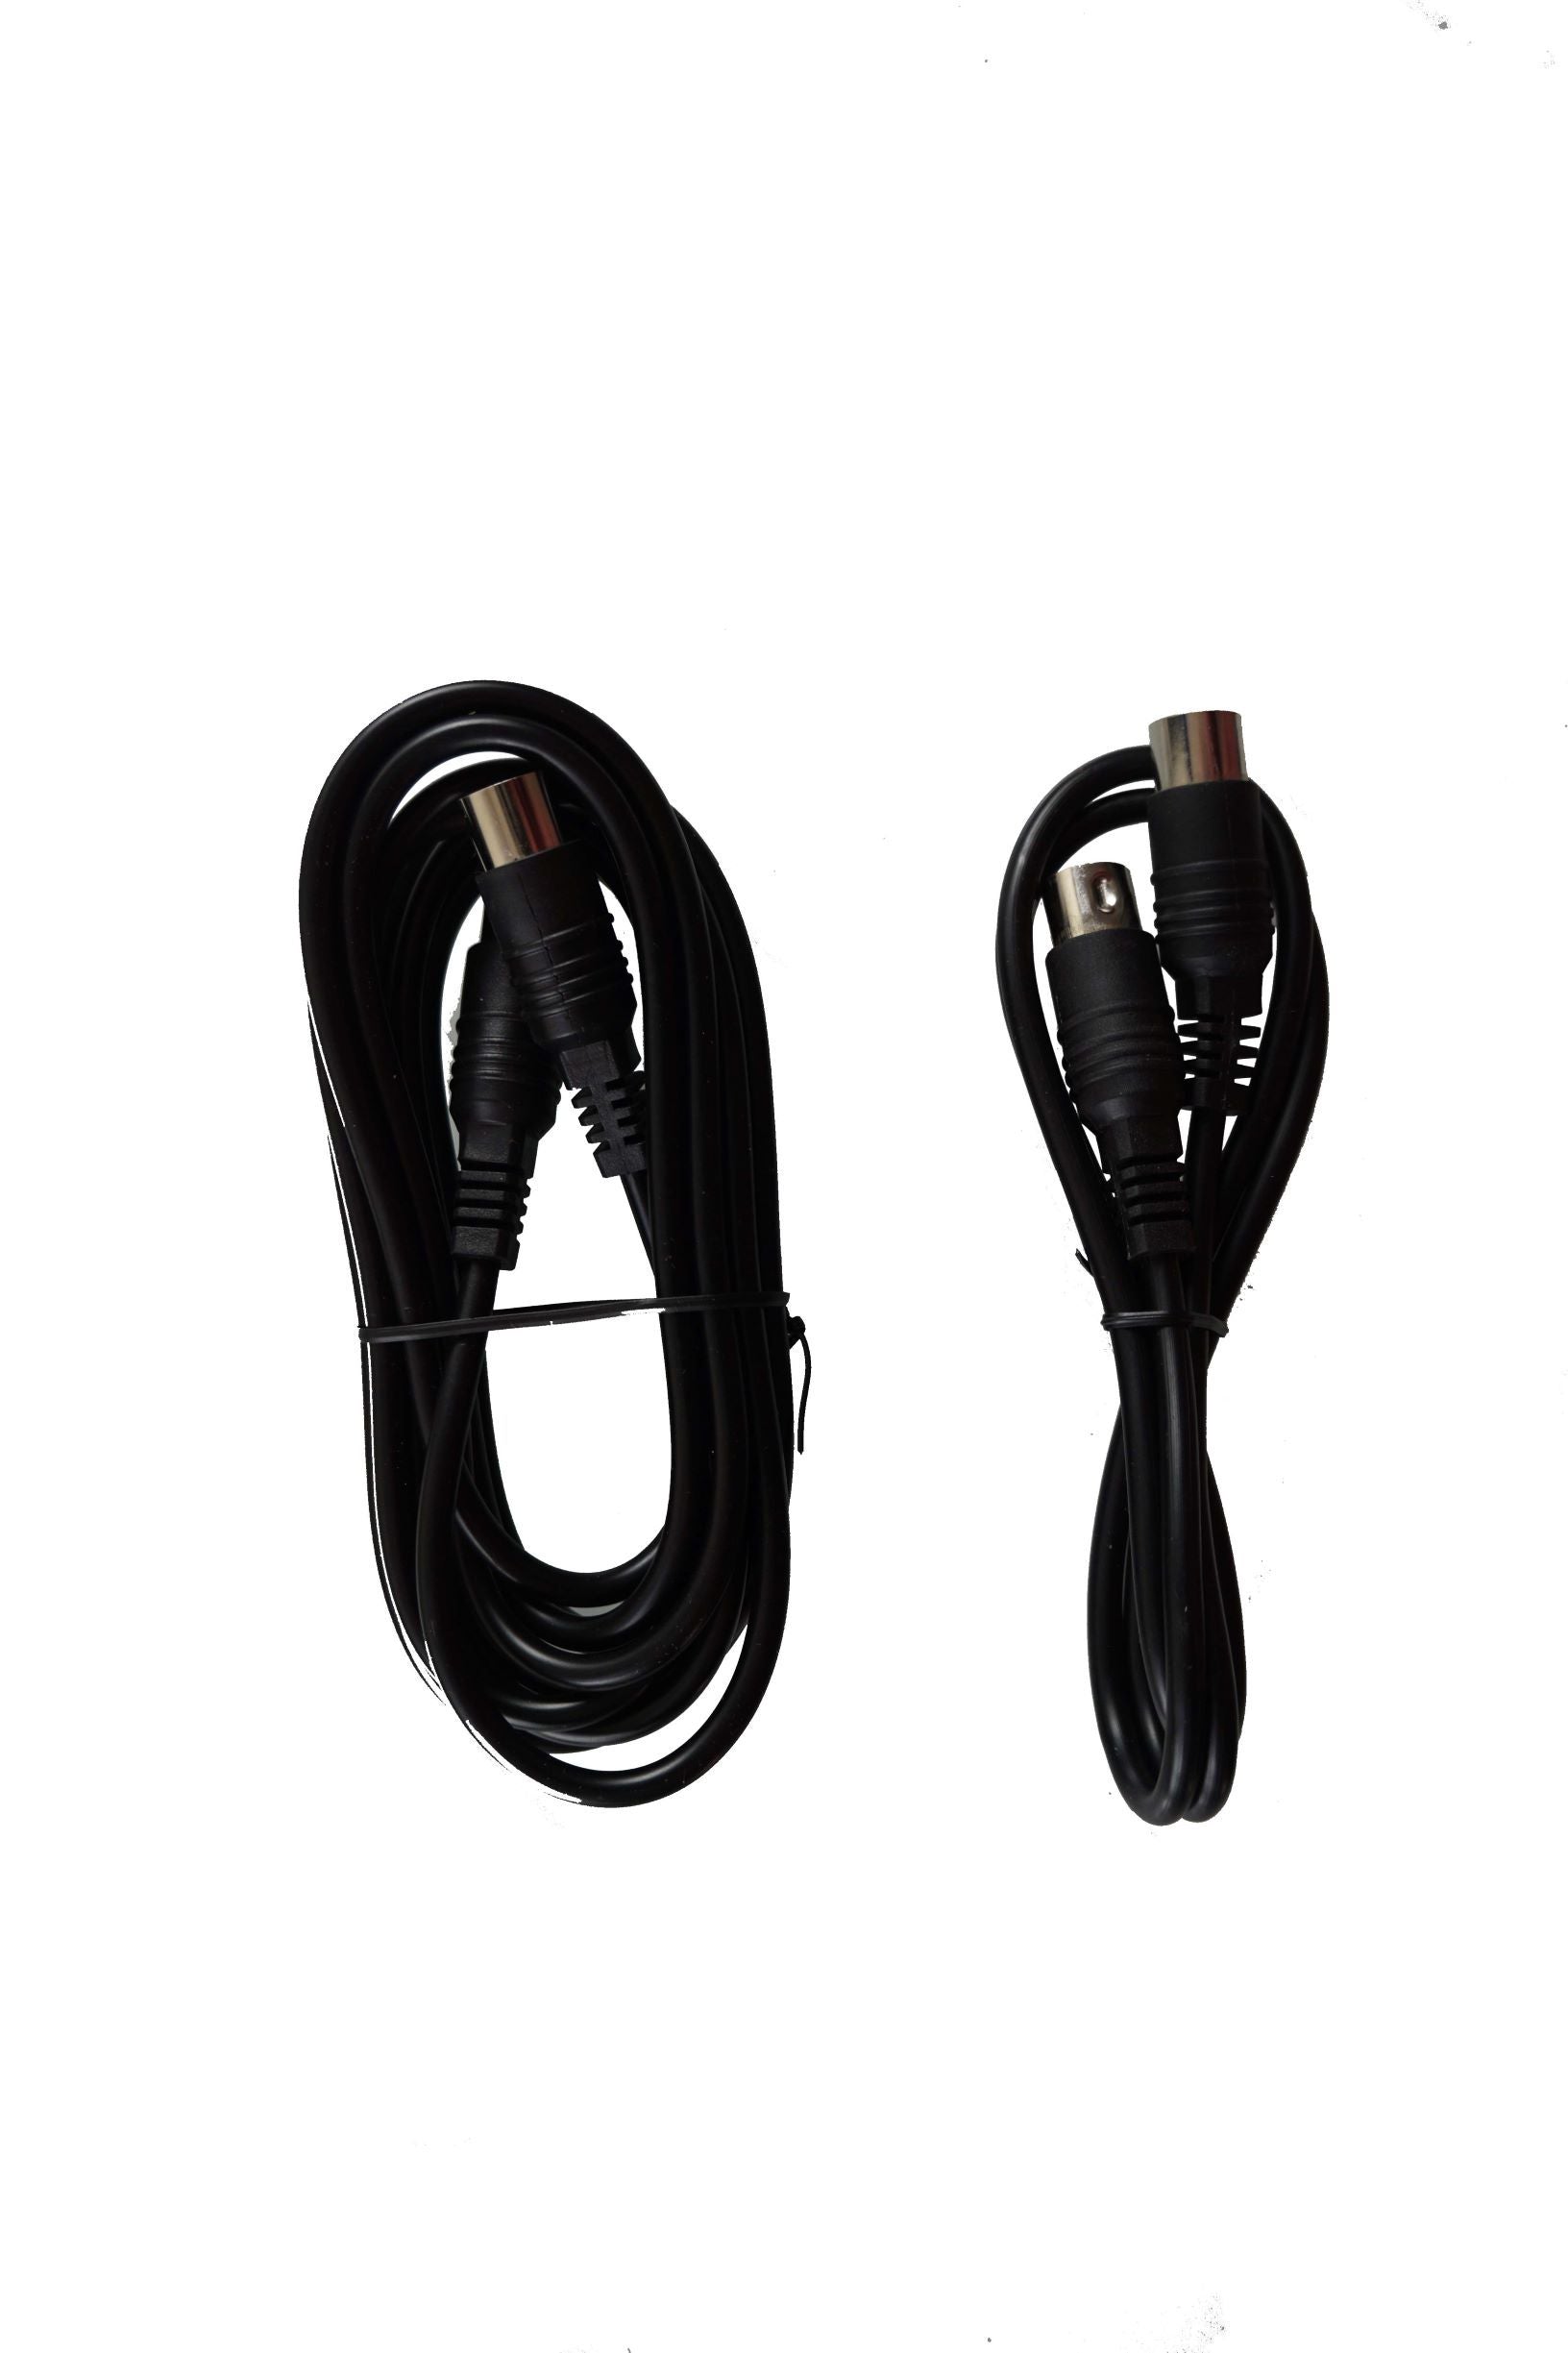 8' 6-Pin DIN cable for MPG-70, PG-200, PG-800